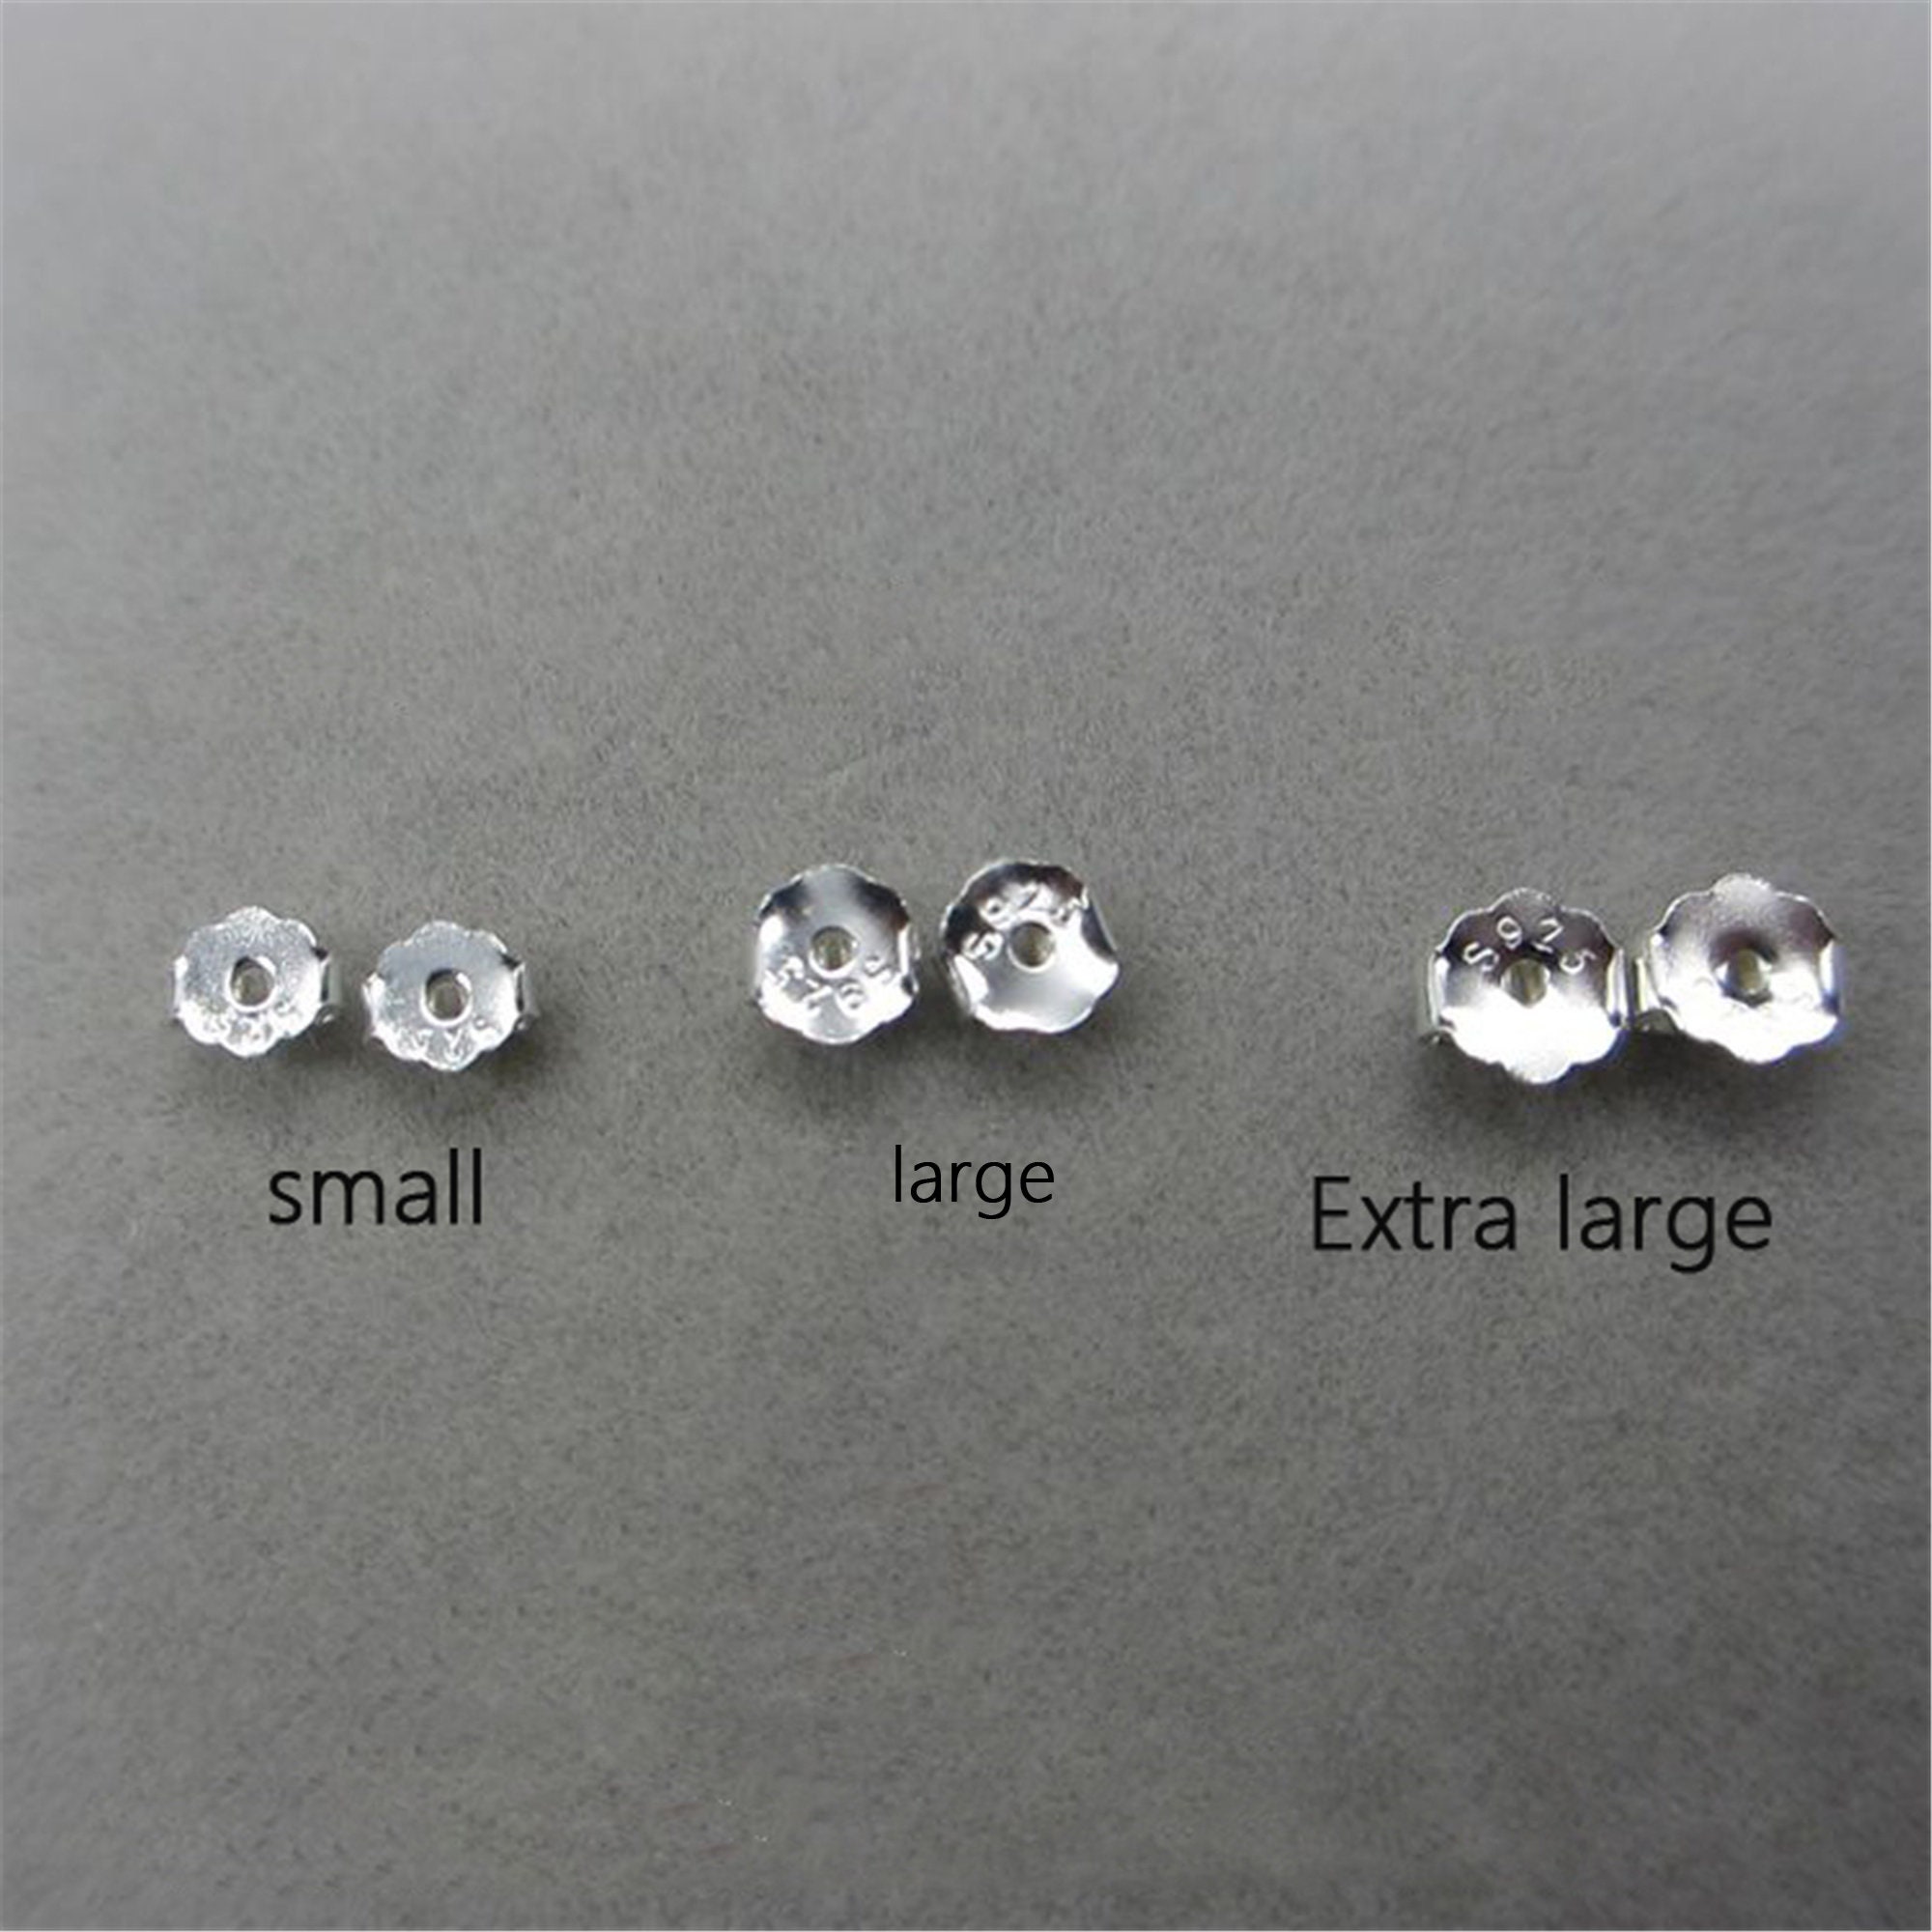 Large ear lifters, 925 solid sterling silver, gold plated, hypo